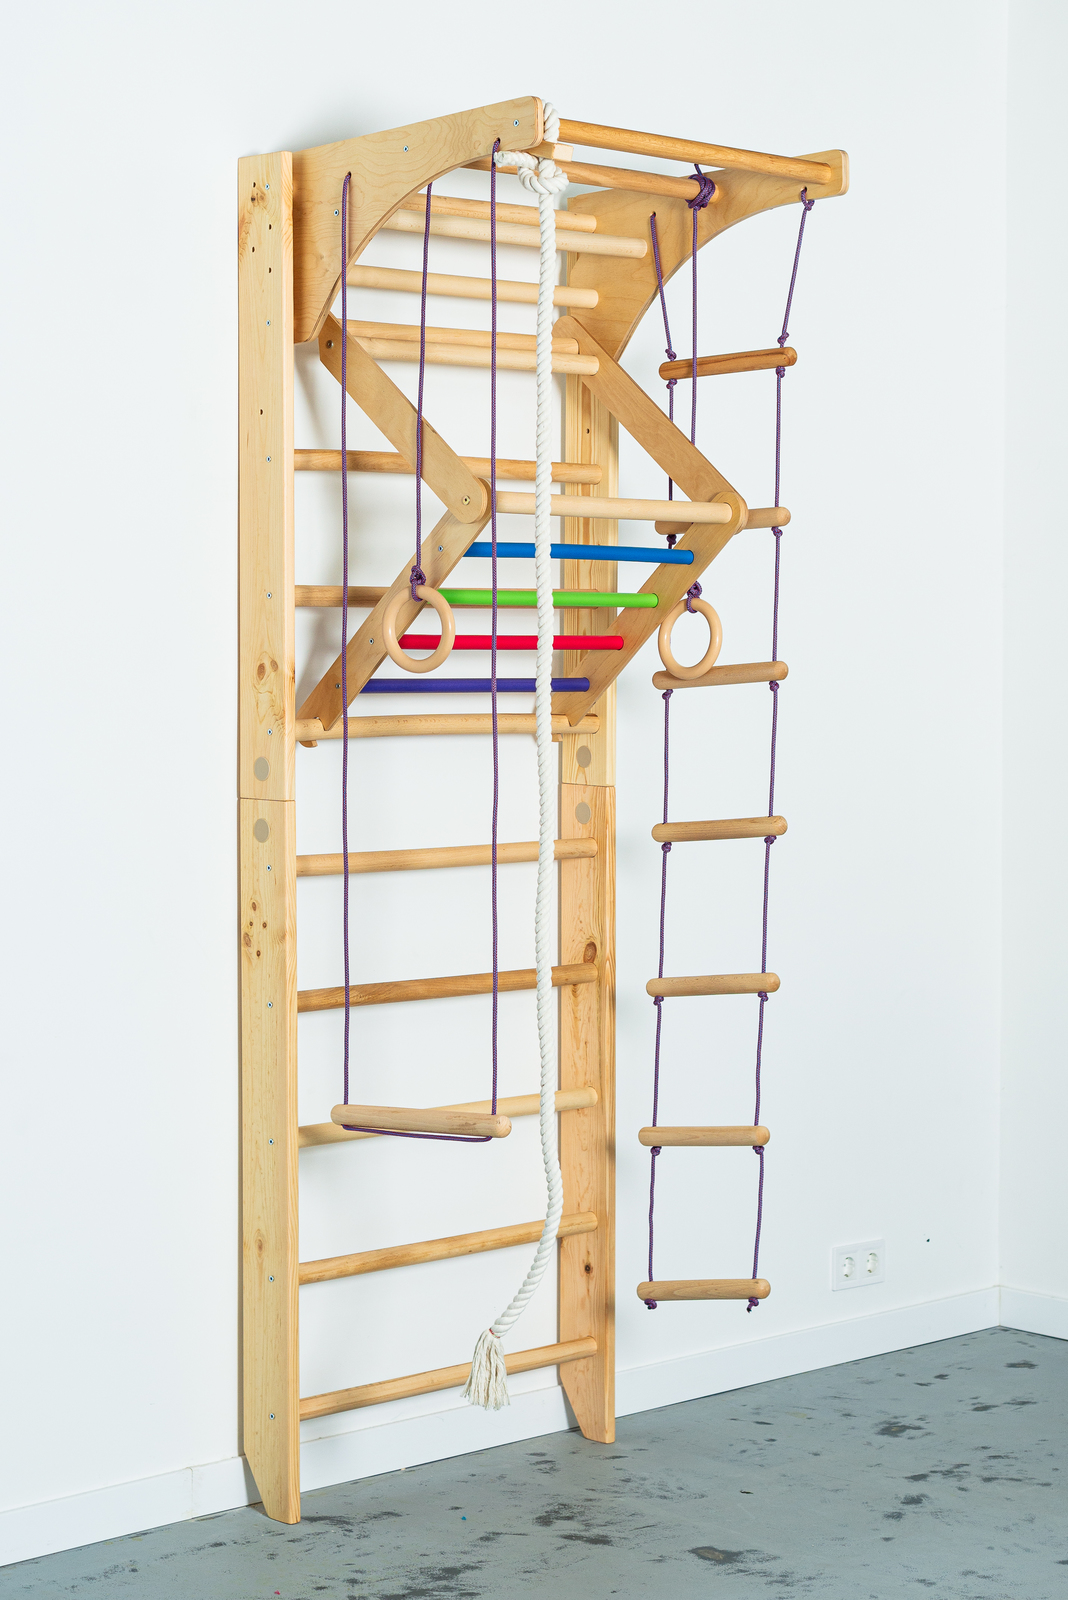 Primary image for Wooden Sport Ladder w/ Rope Attachments and Monkey Bar for Home Use